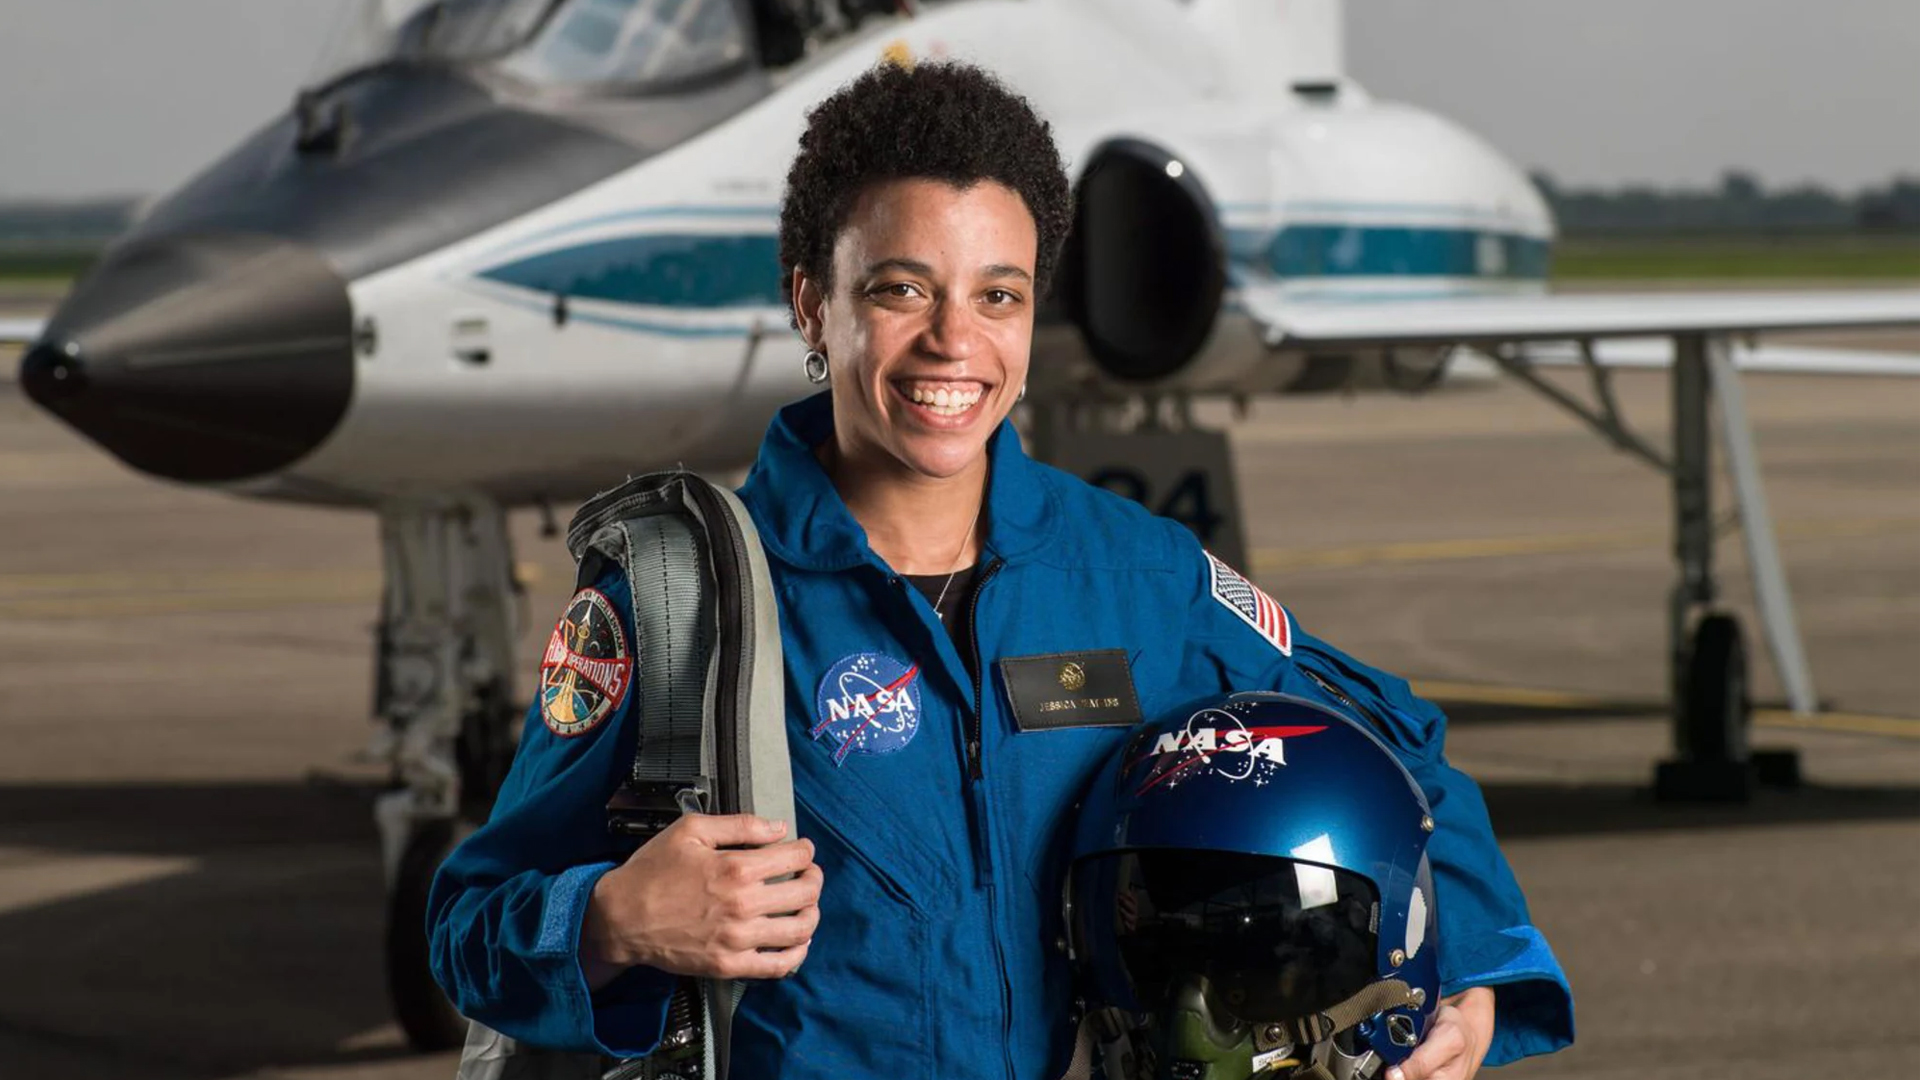 Jessica Watkins To Make History As The First Black Woman To Join The International Space Station Crew